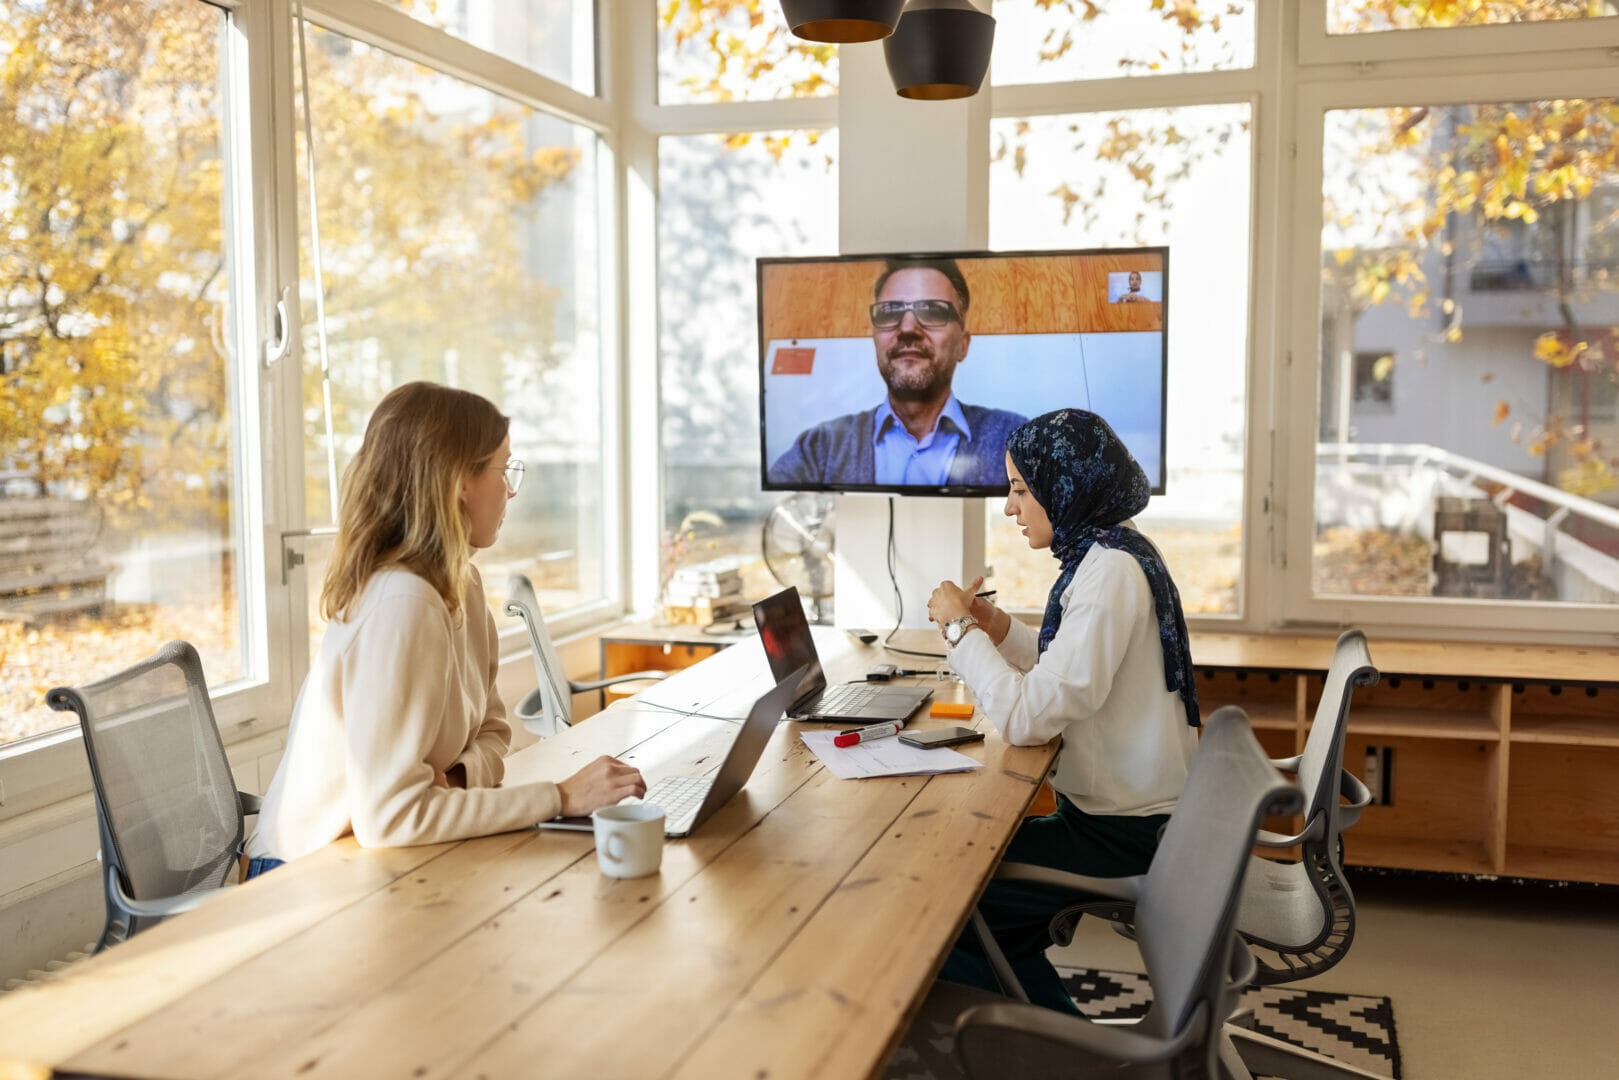 Hybrid Work Is Here: What It Means for Your Meeting Spaces and AV Systems